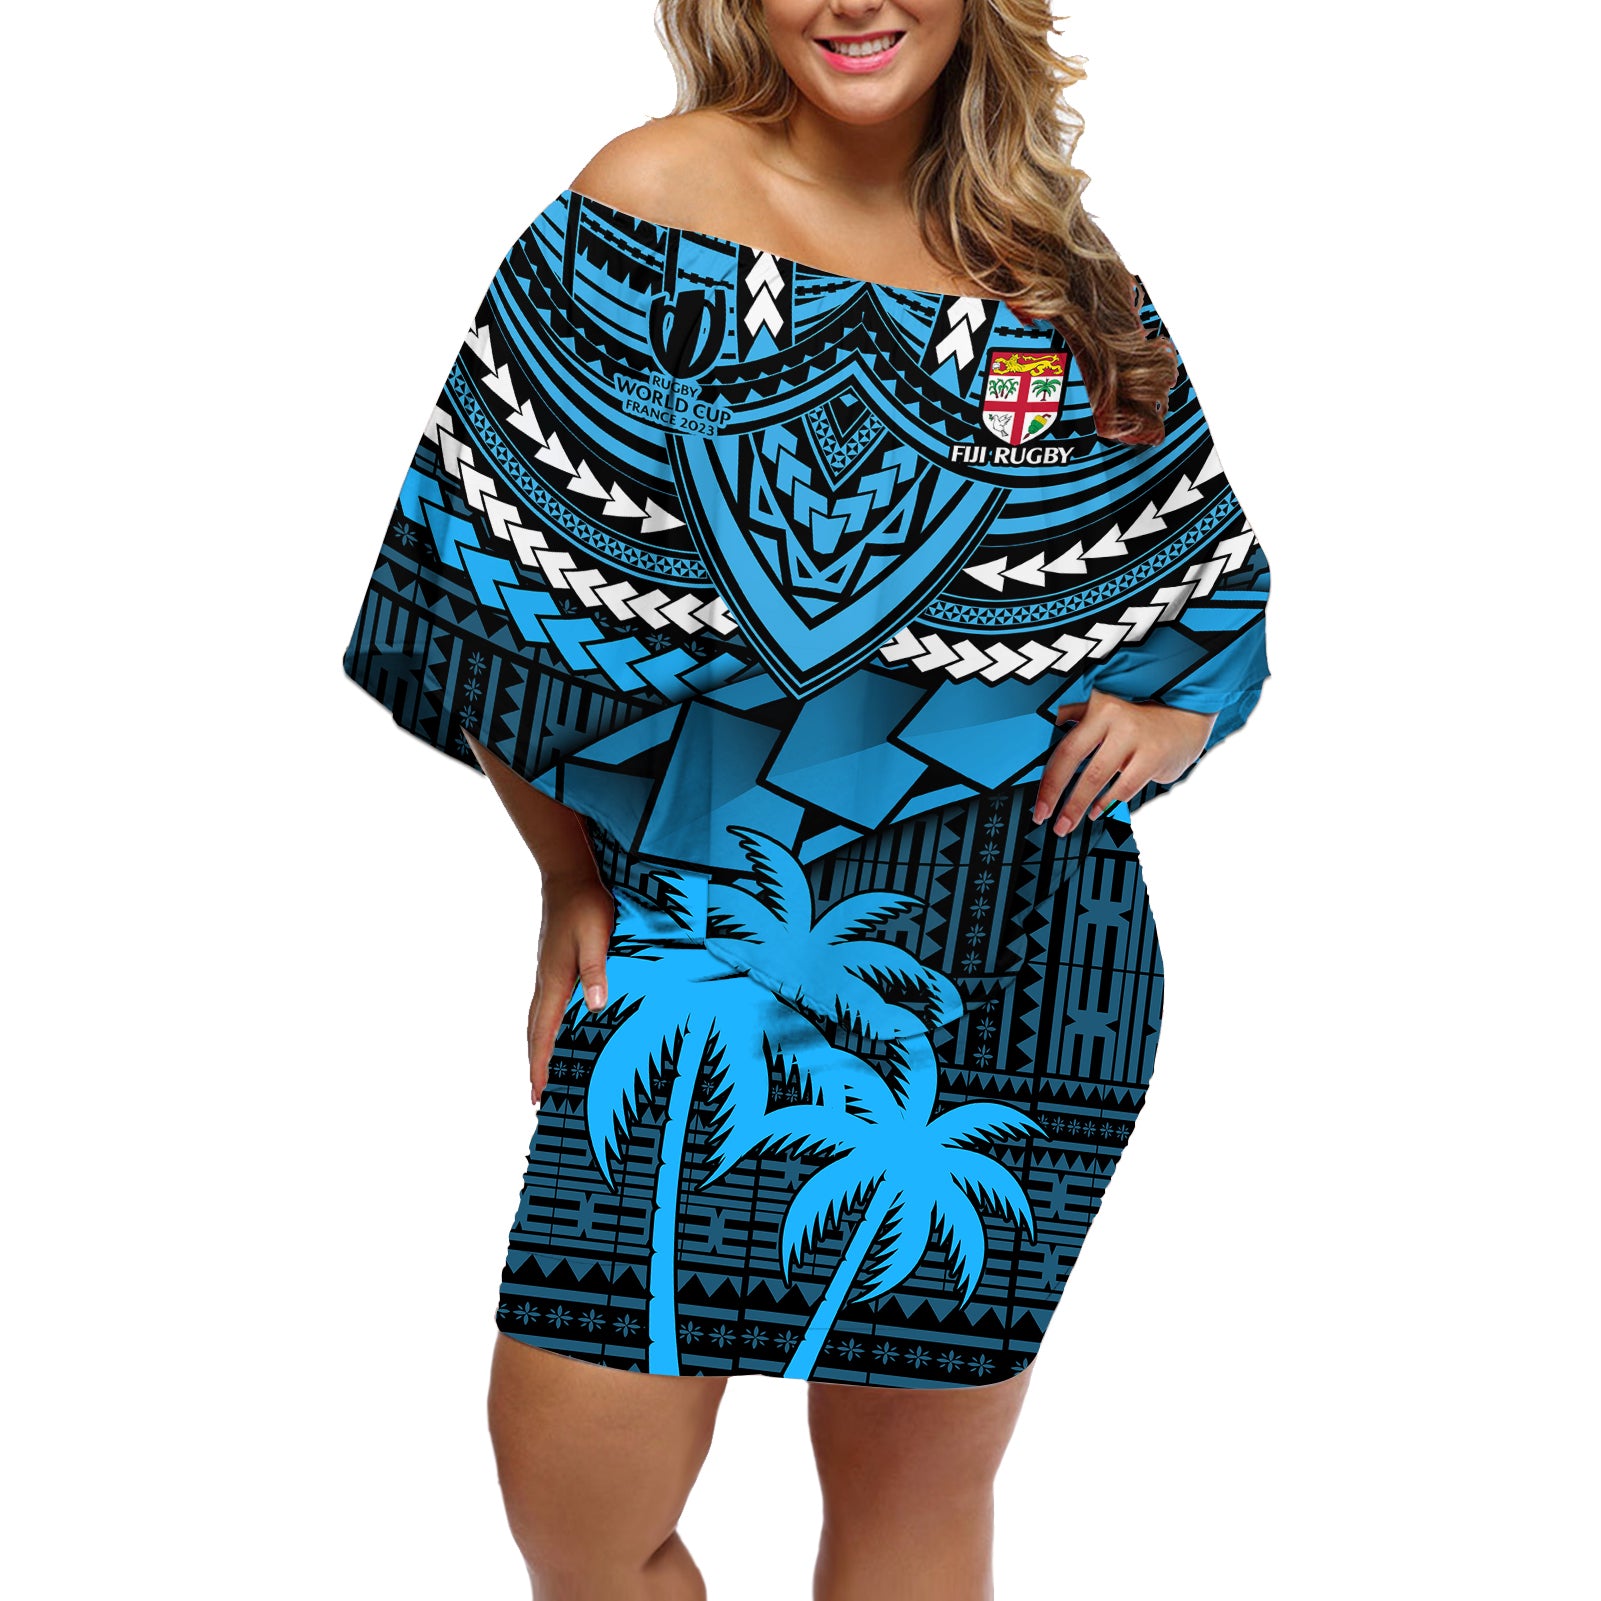 fiji-rugby-off-shoulder-short-dress-go-fijian-tapa-arty-with-world-cup-vibe